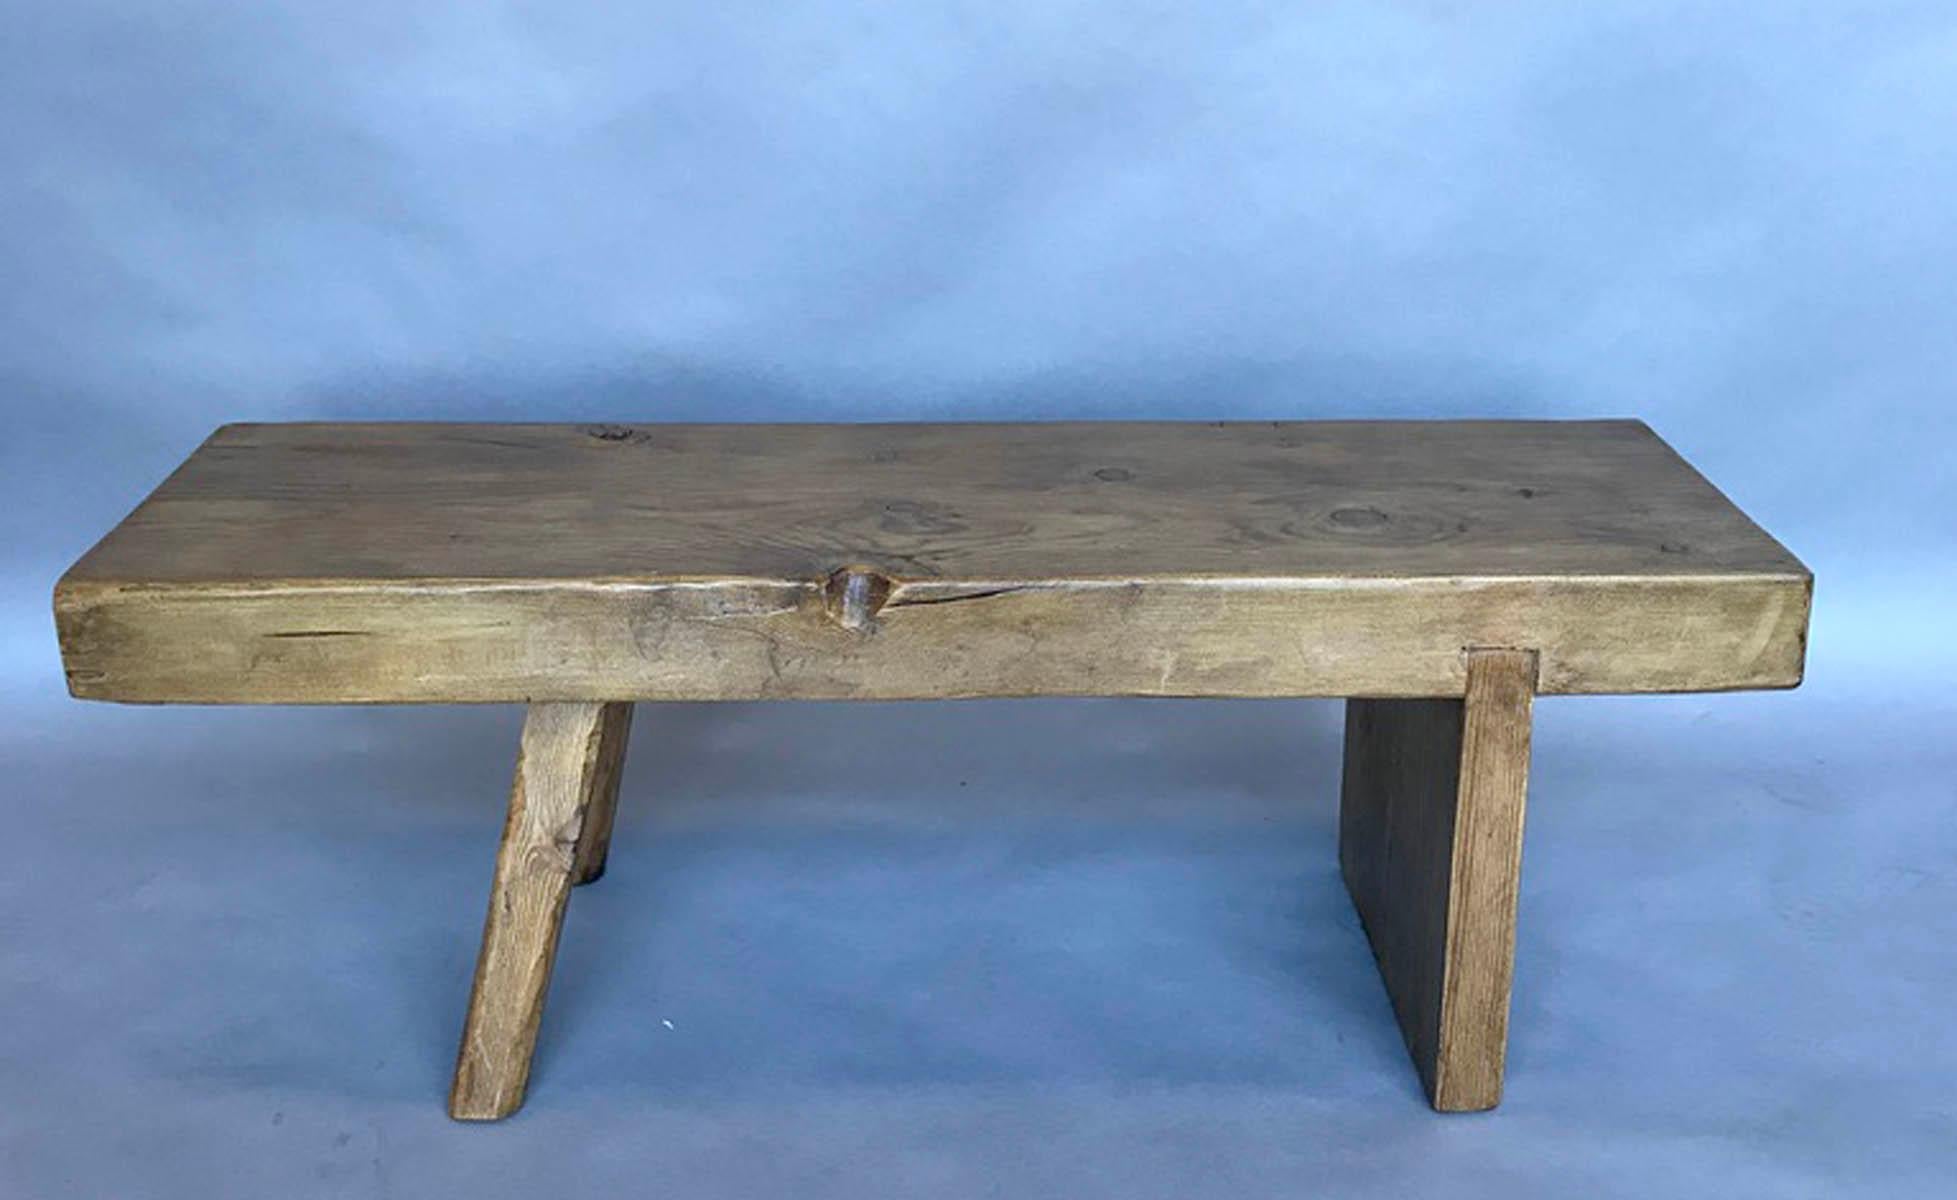 Fun little bench with one perpendicular base and two hand chiseled legs. The top is about 3